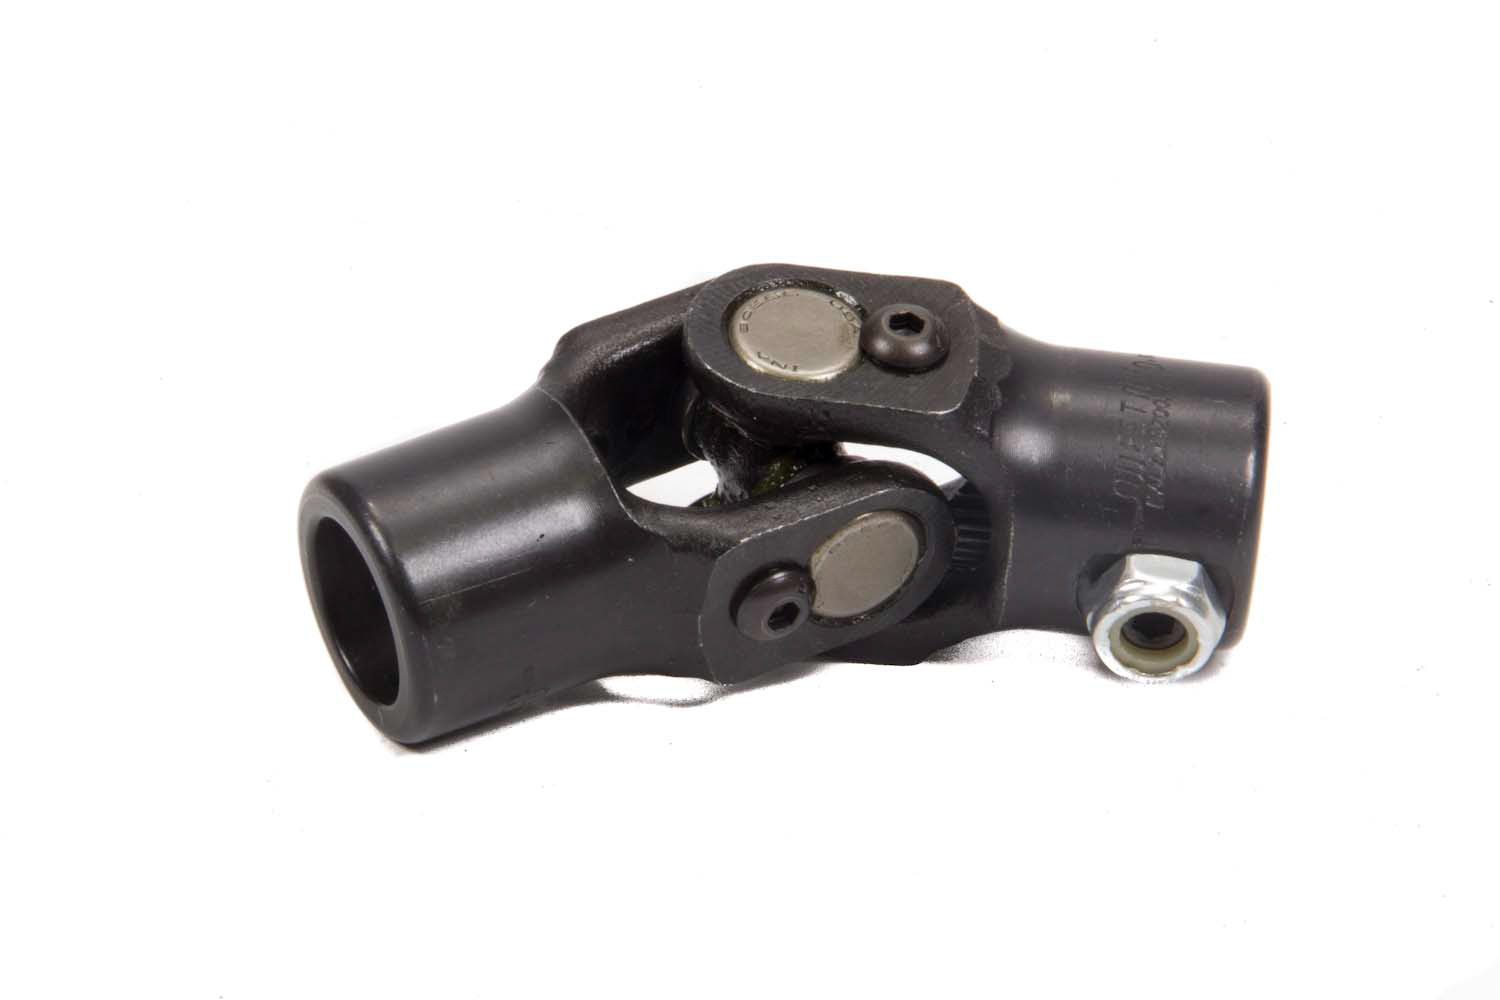 Sweet Manufacturing 401-50611 Steering Universal Joint, Single Joint, 3/4 in Smooth Bore to 13/16 in 36 Spline, Steel, Black Paint, Each